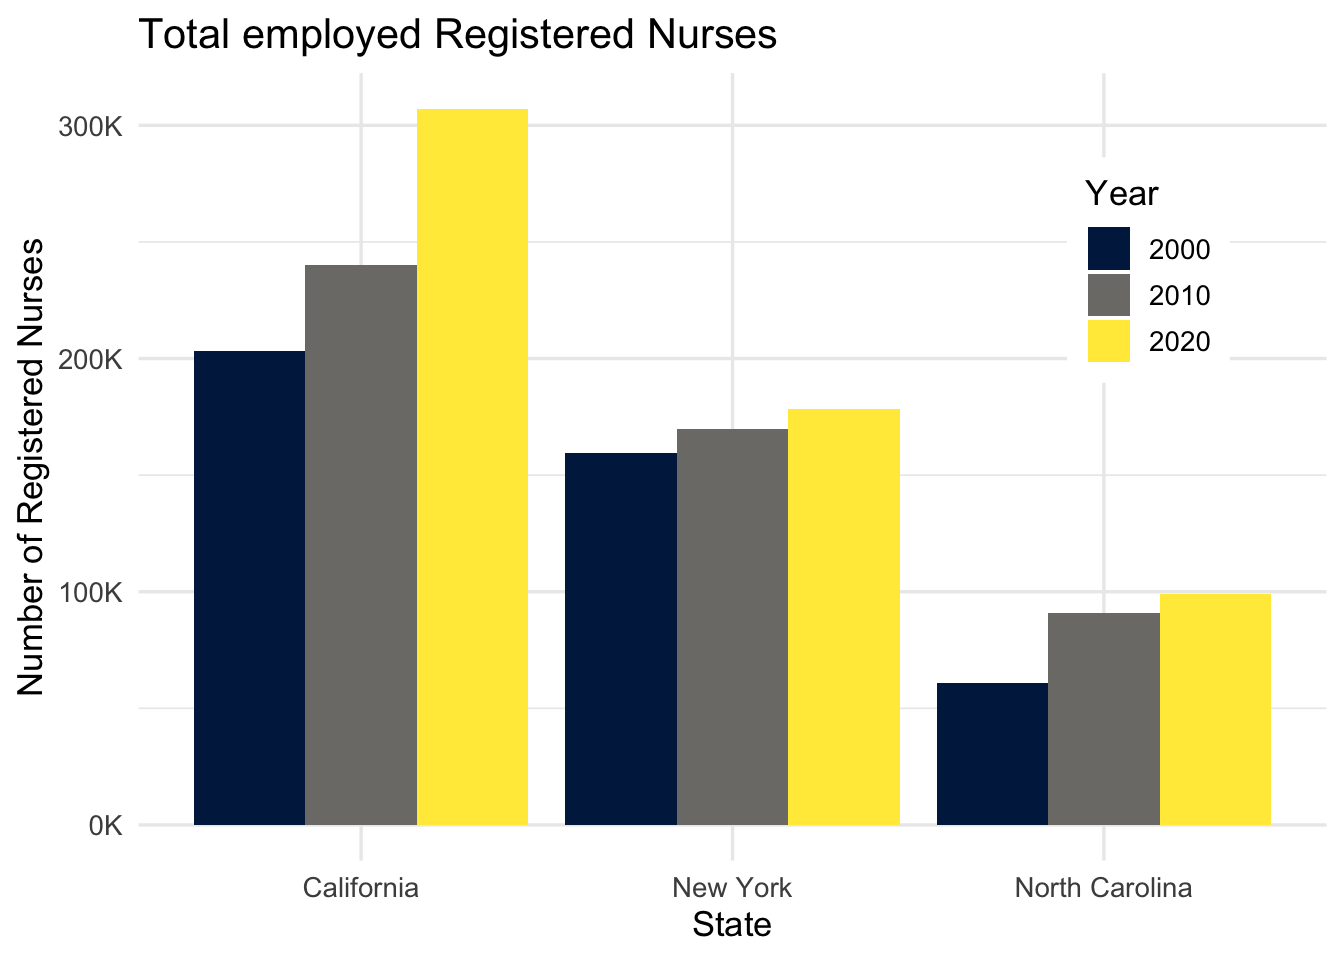 The figure is a bar chart titled 'Total employed Registered Nurses' that displays the numbers of registered nurses in three states (California, New York, and North Carolina) over a 20 year period, with data recorded in three time points (2000, 2010, and 2020). In each state, the numbers of registered nurses increase over time. The following numbers are all approximate. California started off with 200K registered nurses in 2000, 240K in 2010, and 300K in 2020. New York had 150K in 2000, 160K in 2010, and 170K in 2020. Finally North Carolina had 60K in 2000, 90K in 2010, and 100K in 2020.